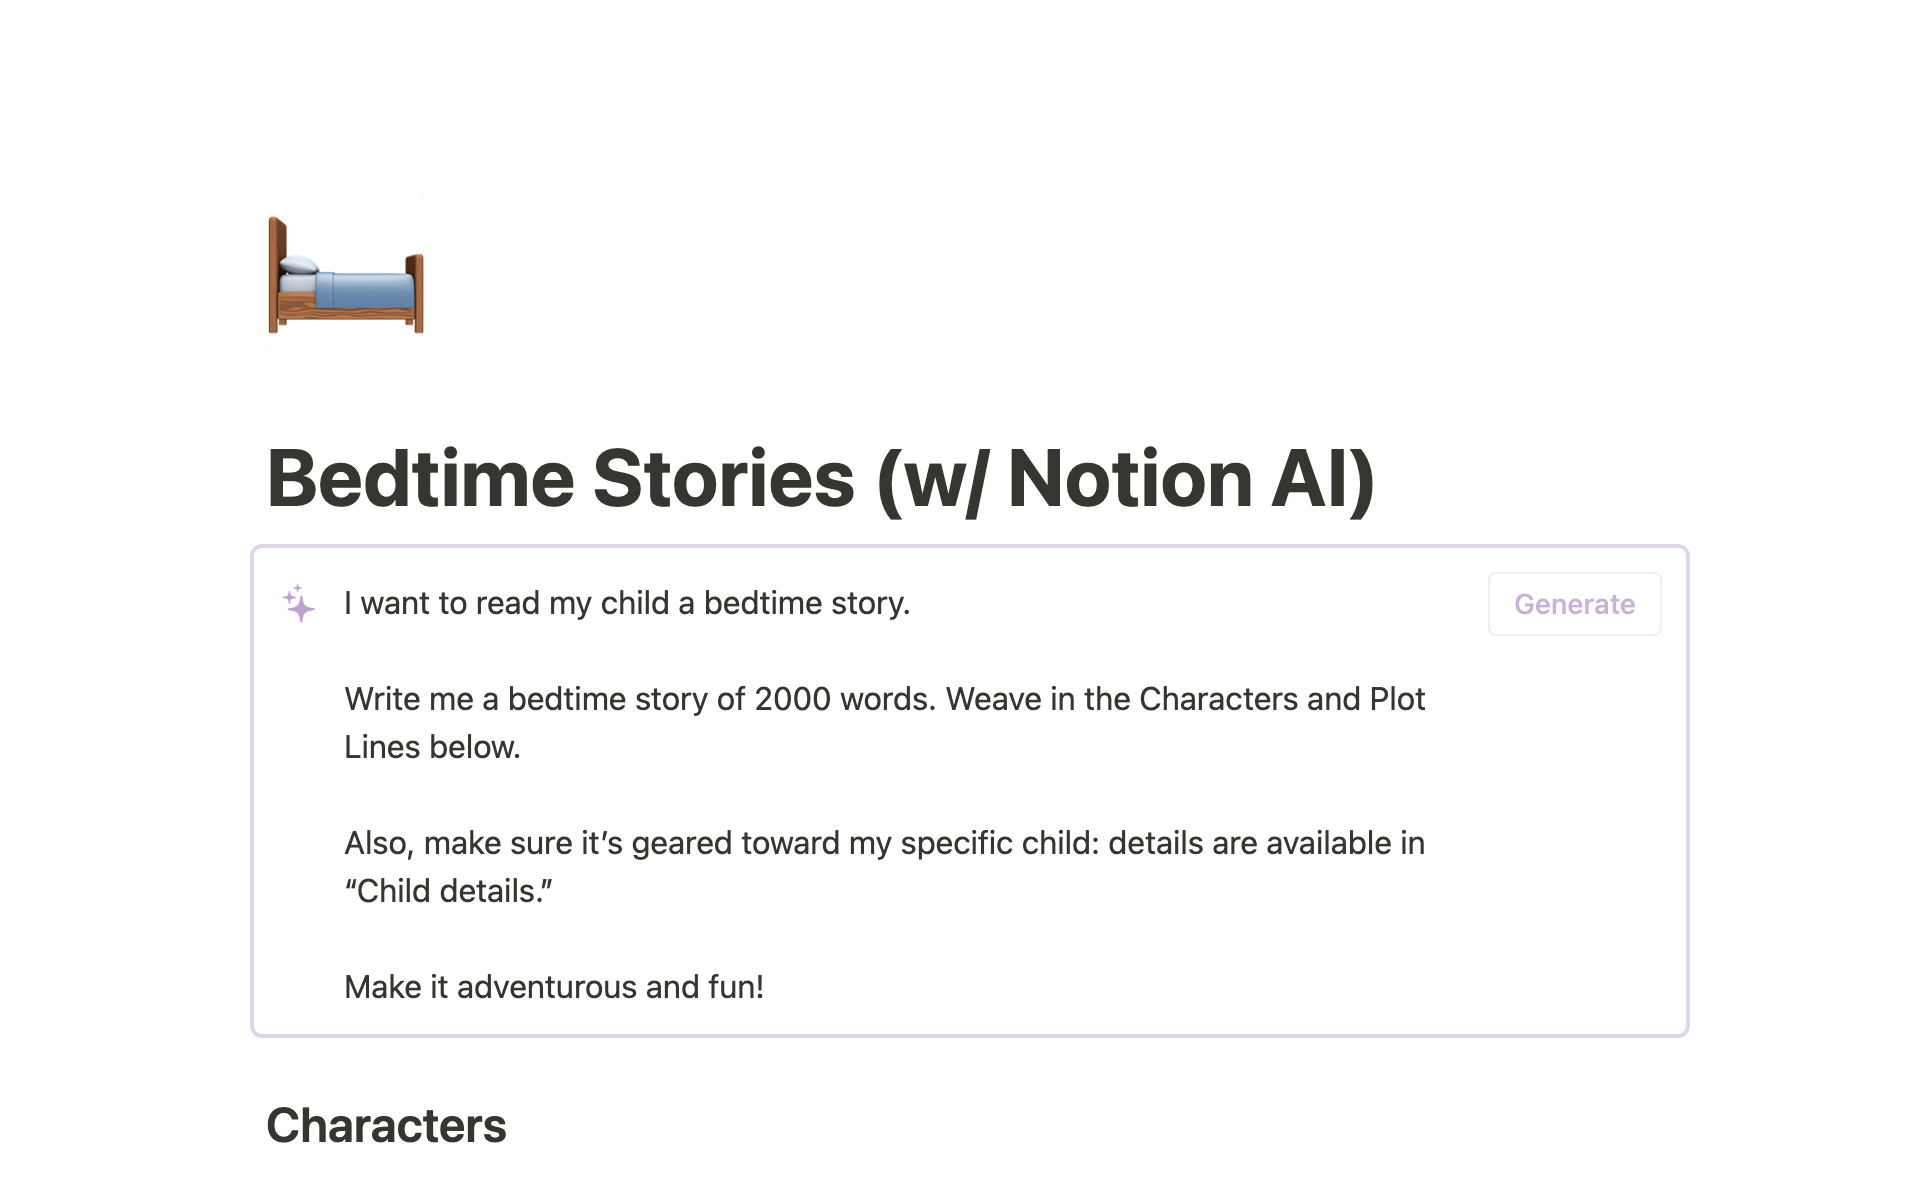 Need a quick bedtime story for your kids and feeling uninspired? Look to Notion AI for help!